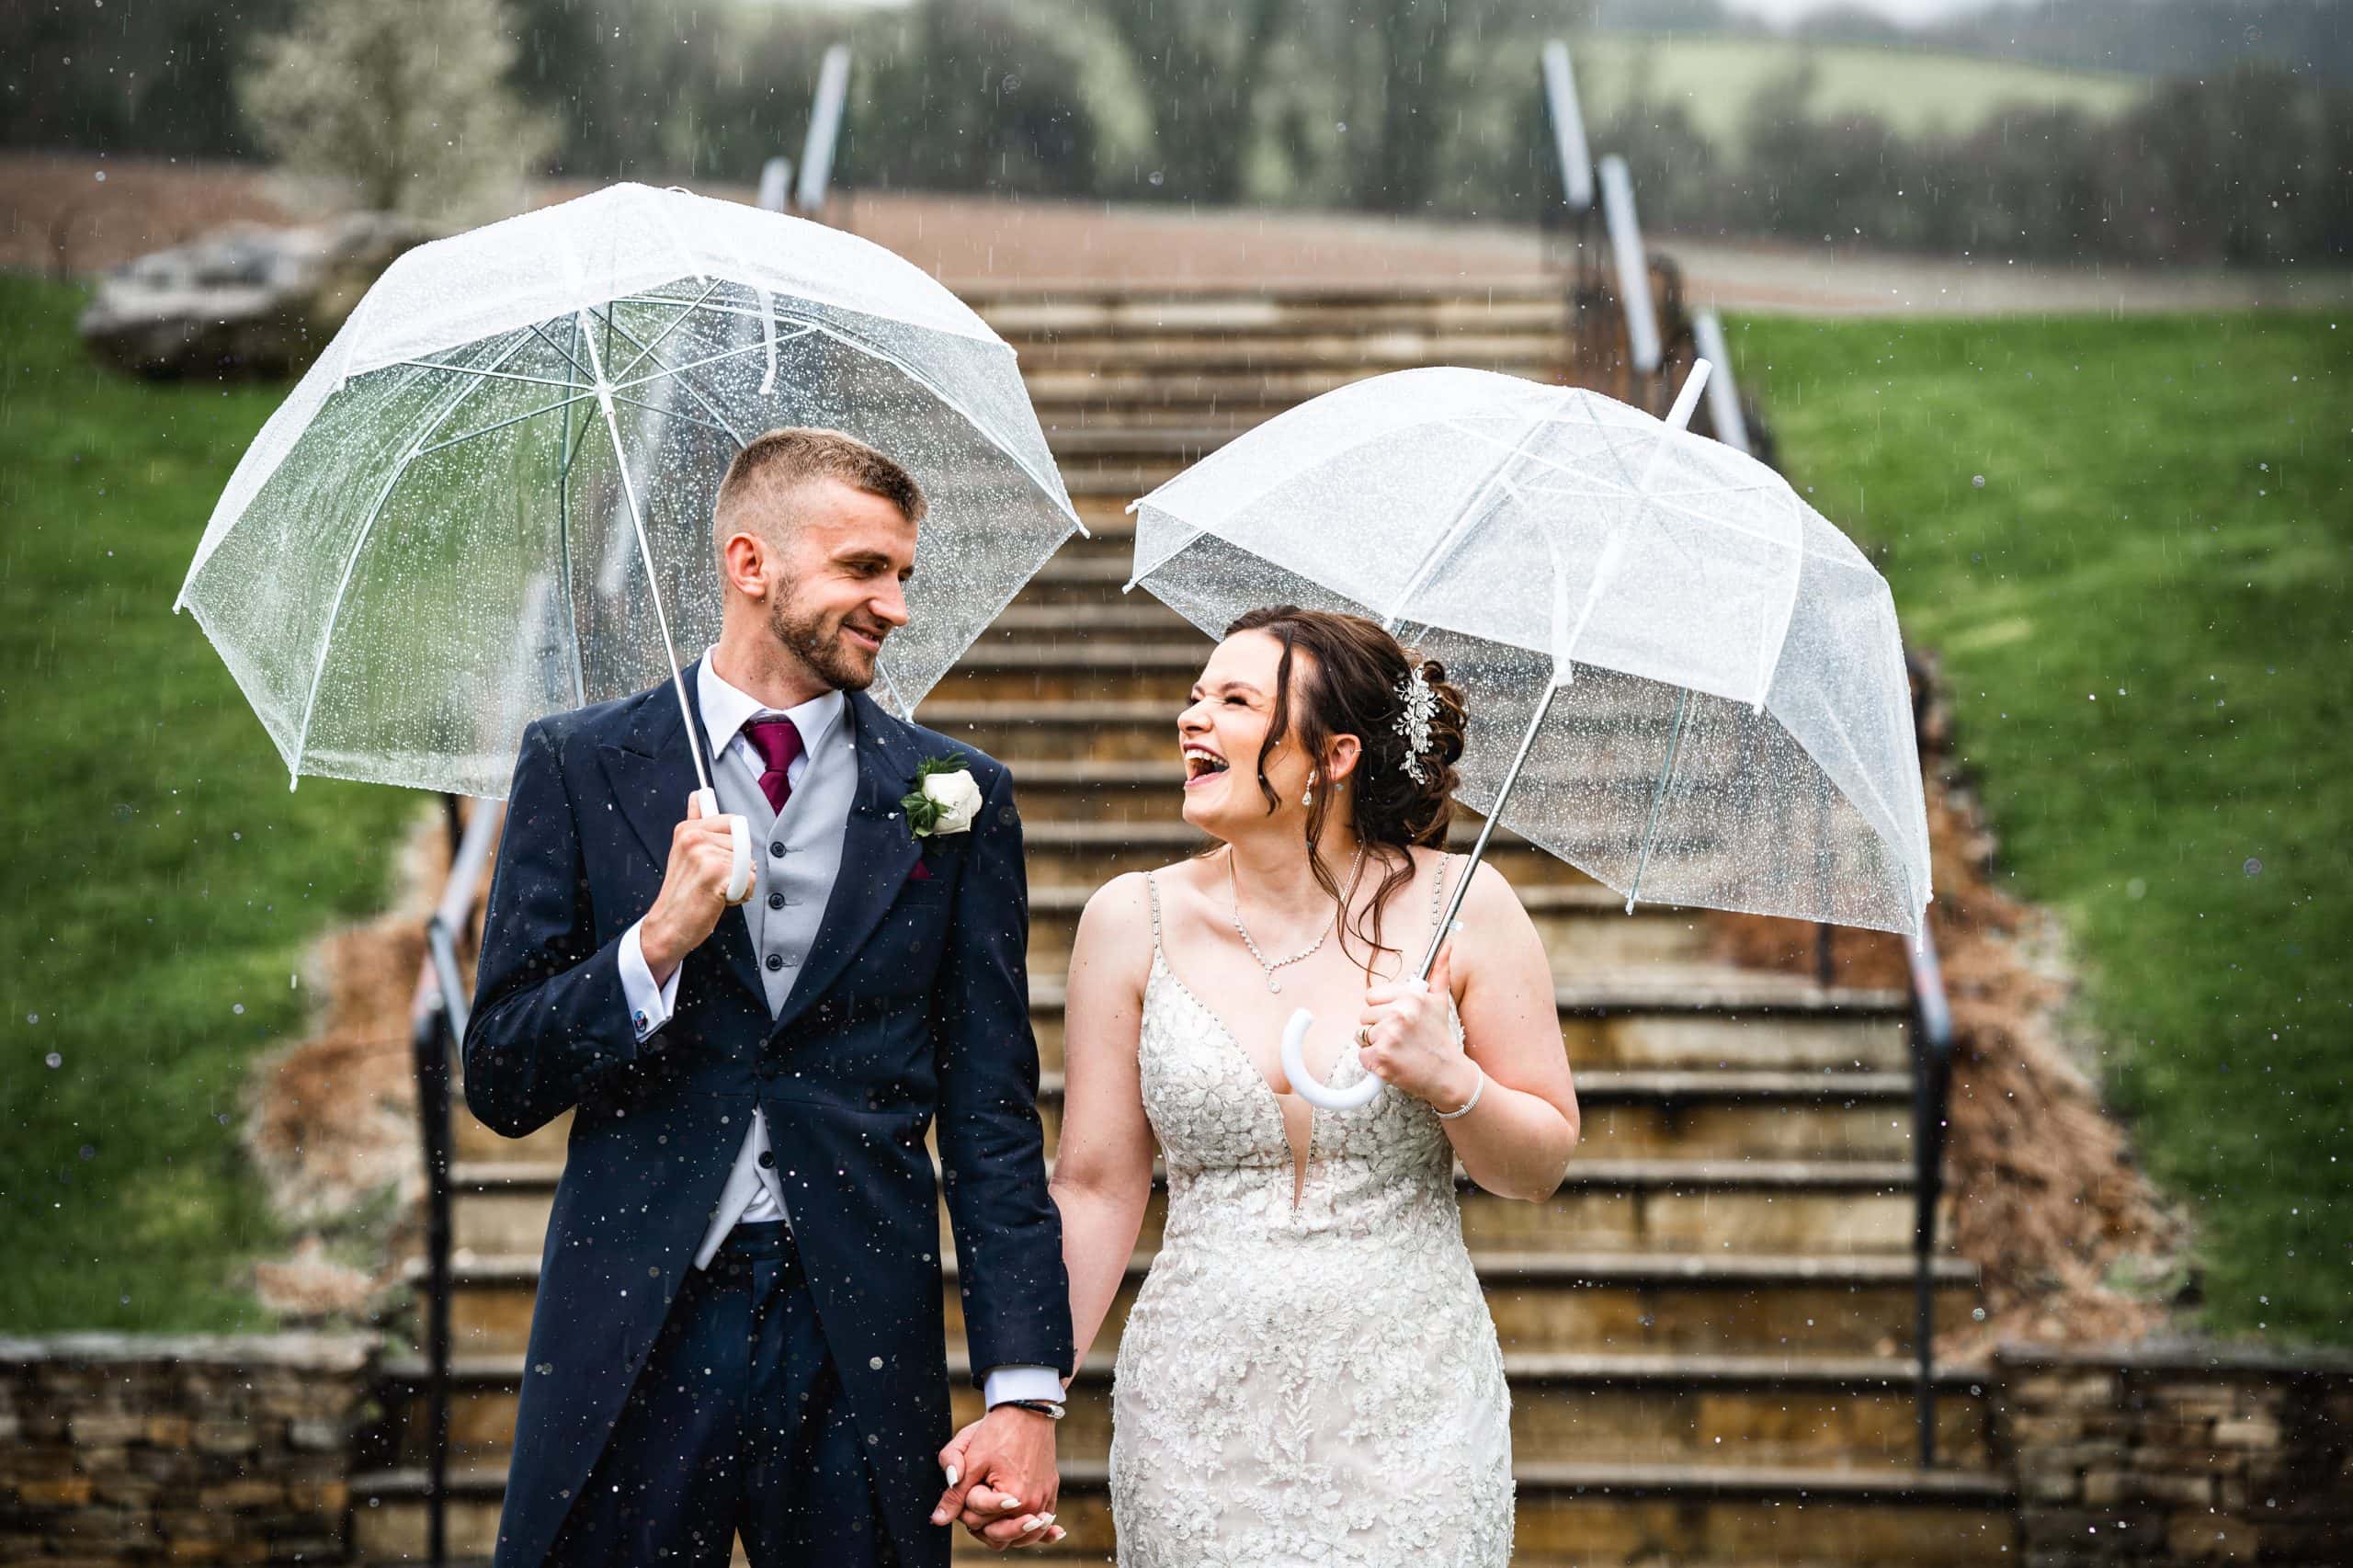 It may be raining but this couple won't stop smiling whilst celebrating their wedding day, under an umbrella, at The Barn at Upcote, Cheltenham